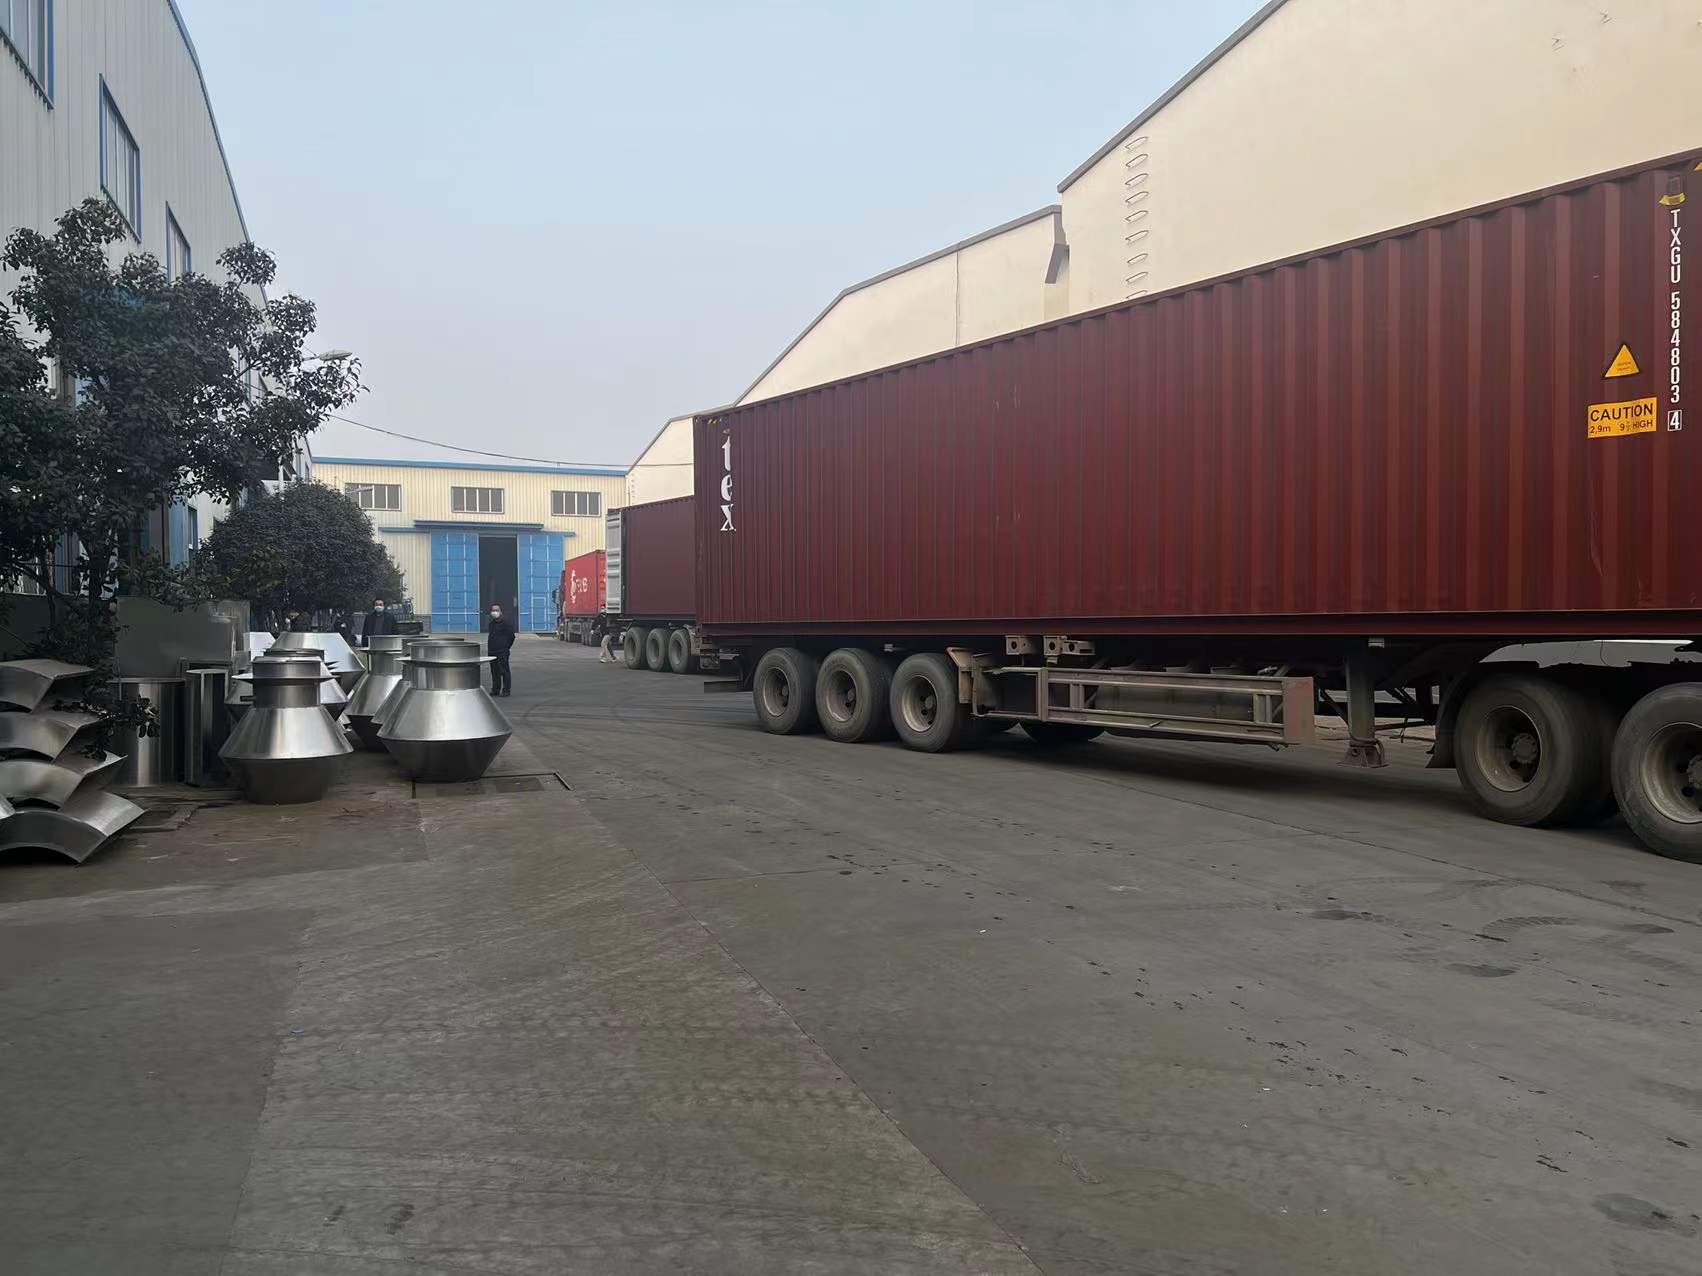 Shipment of Dongfang Brand New Noodle Production Lines